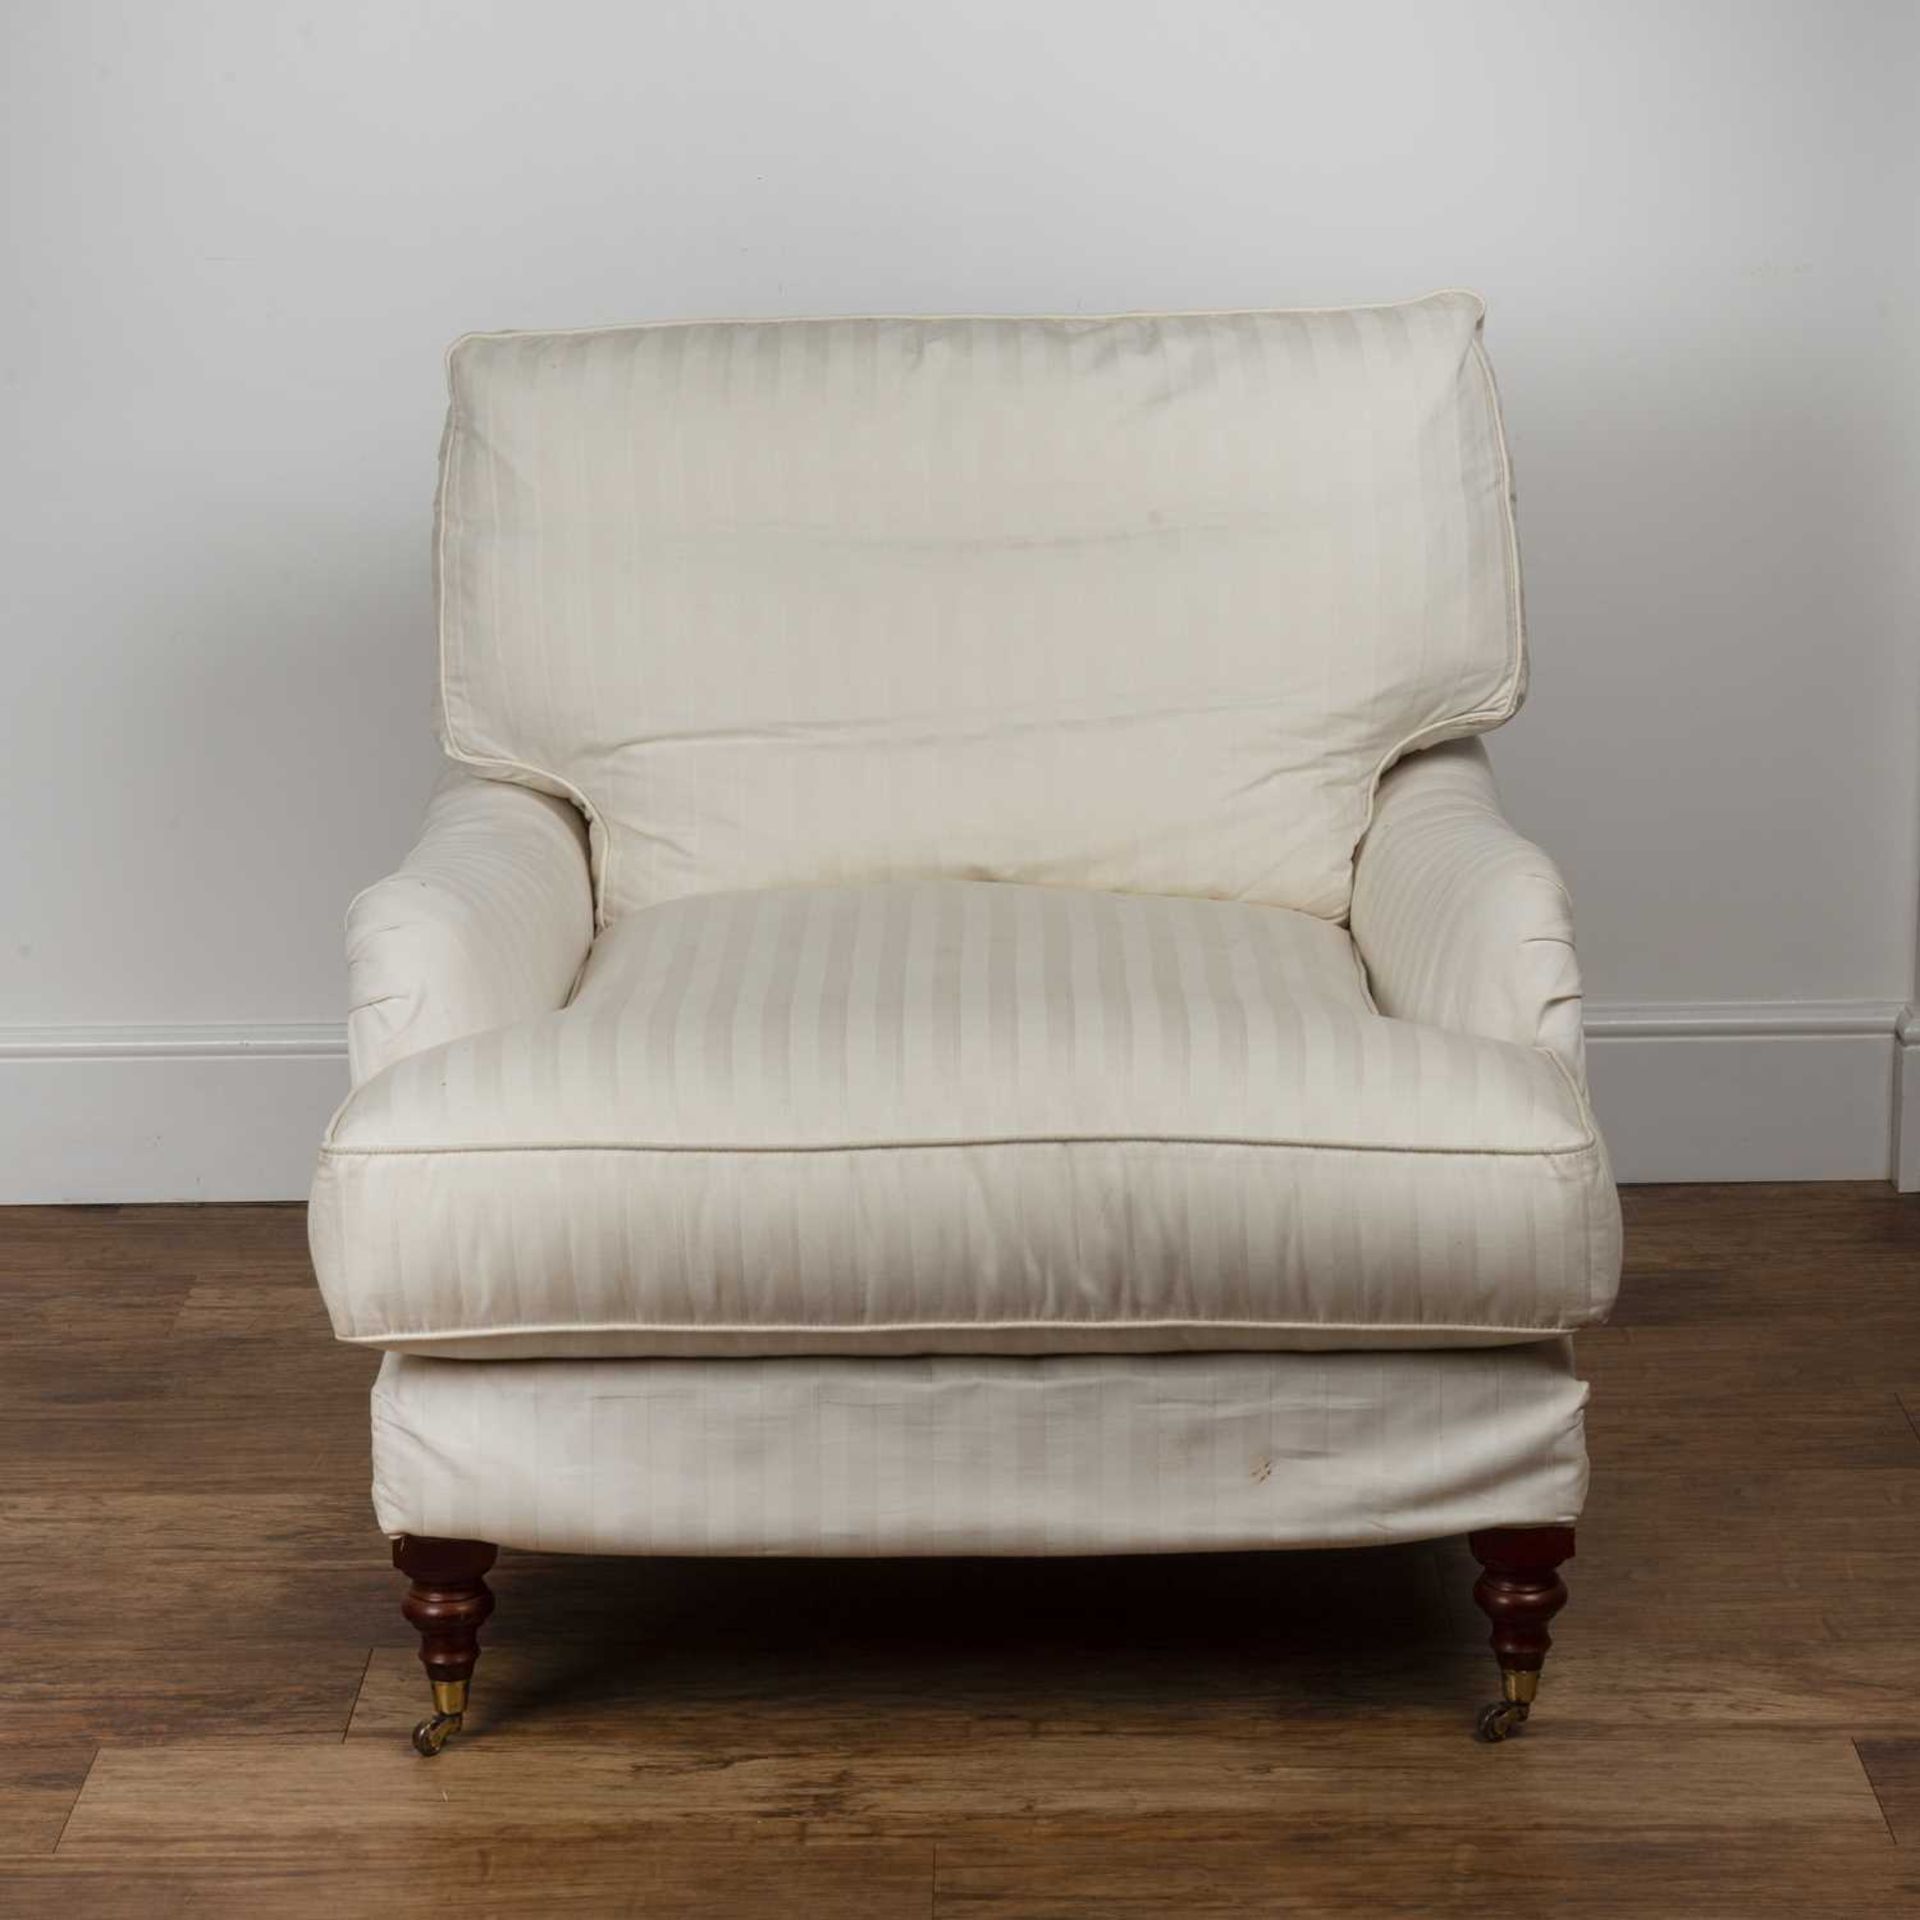 Howard style armchair Contemporary, with white striped upholstery, on brass castors, 86cm wide - Image 2 of 5